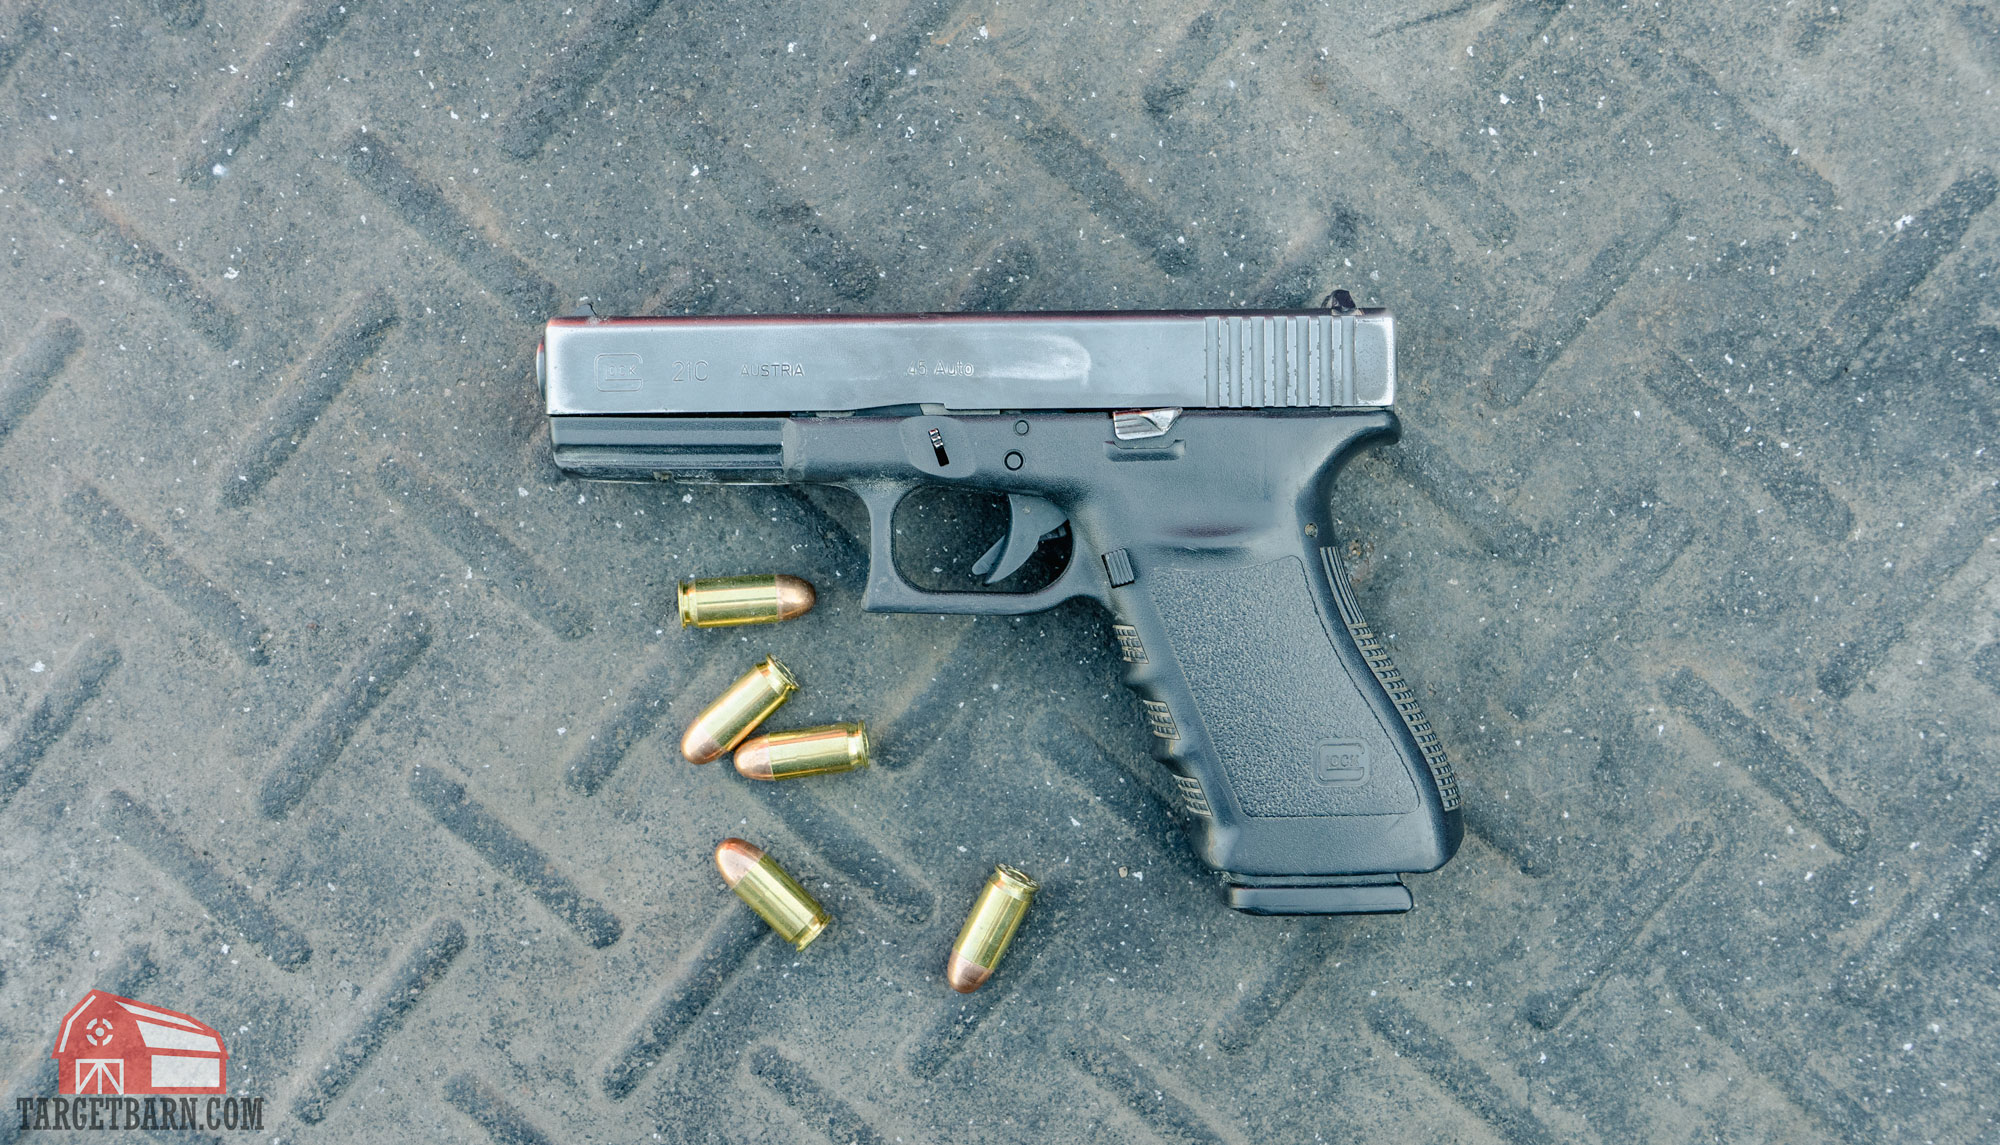 a .45 ACP glock 21c with 5 rounds of .45 acp ammo